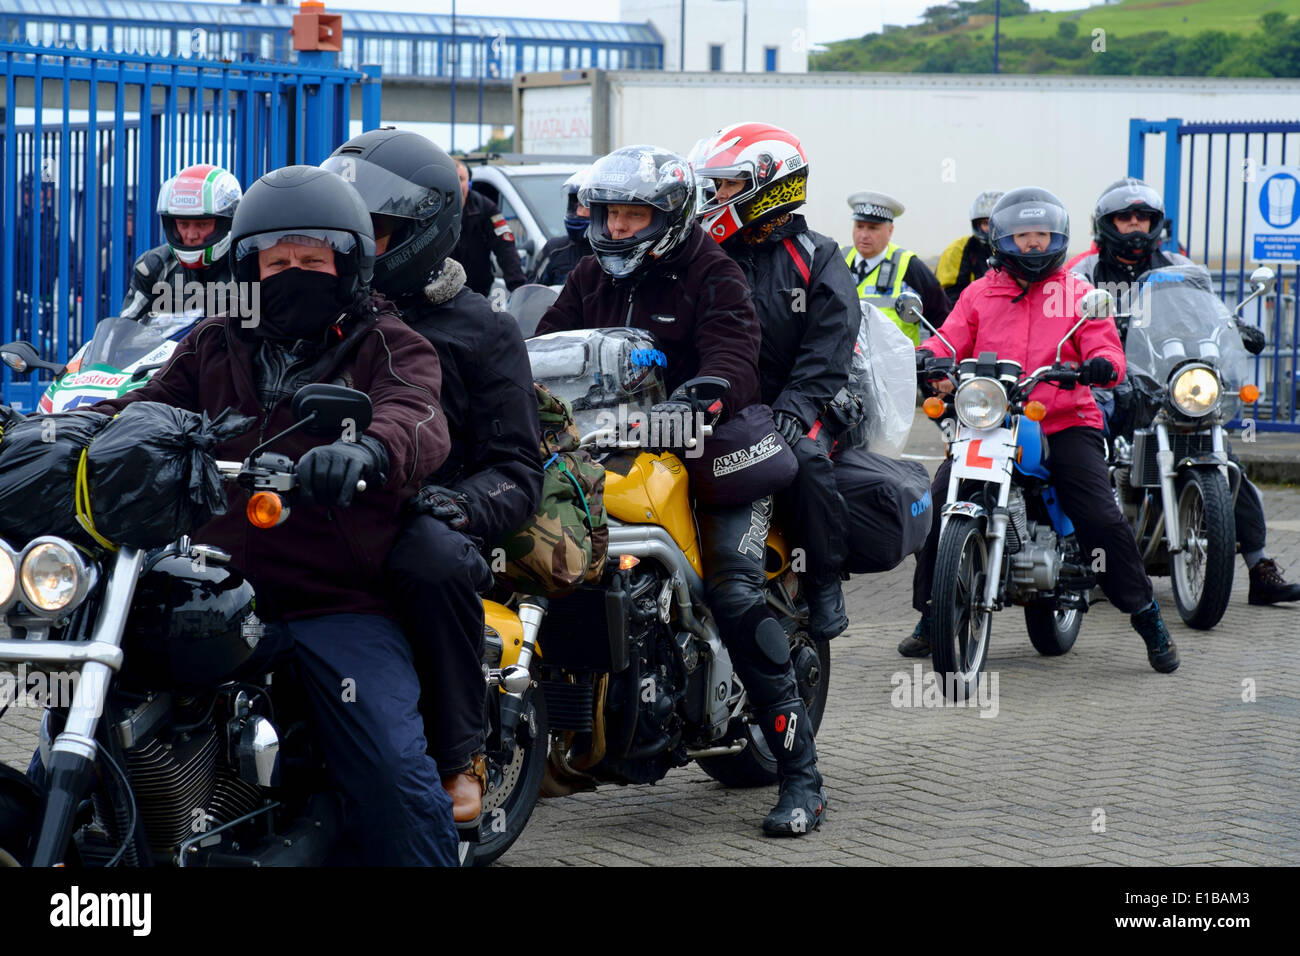 Douglas, Isle of Man. 29th May 2014. Motorcycling enthusiasts arriving for the 2014 TT. The festival comprises a week of qualifying events followed by a week of racing on closed public roads. Credit:  Daisy Corlett/Alamy Live News Stock Photo